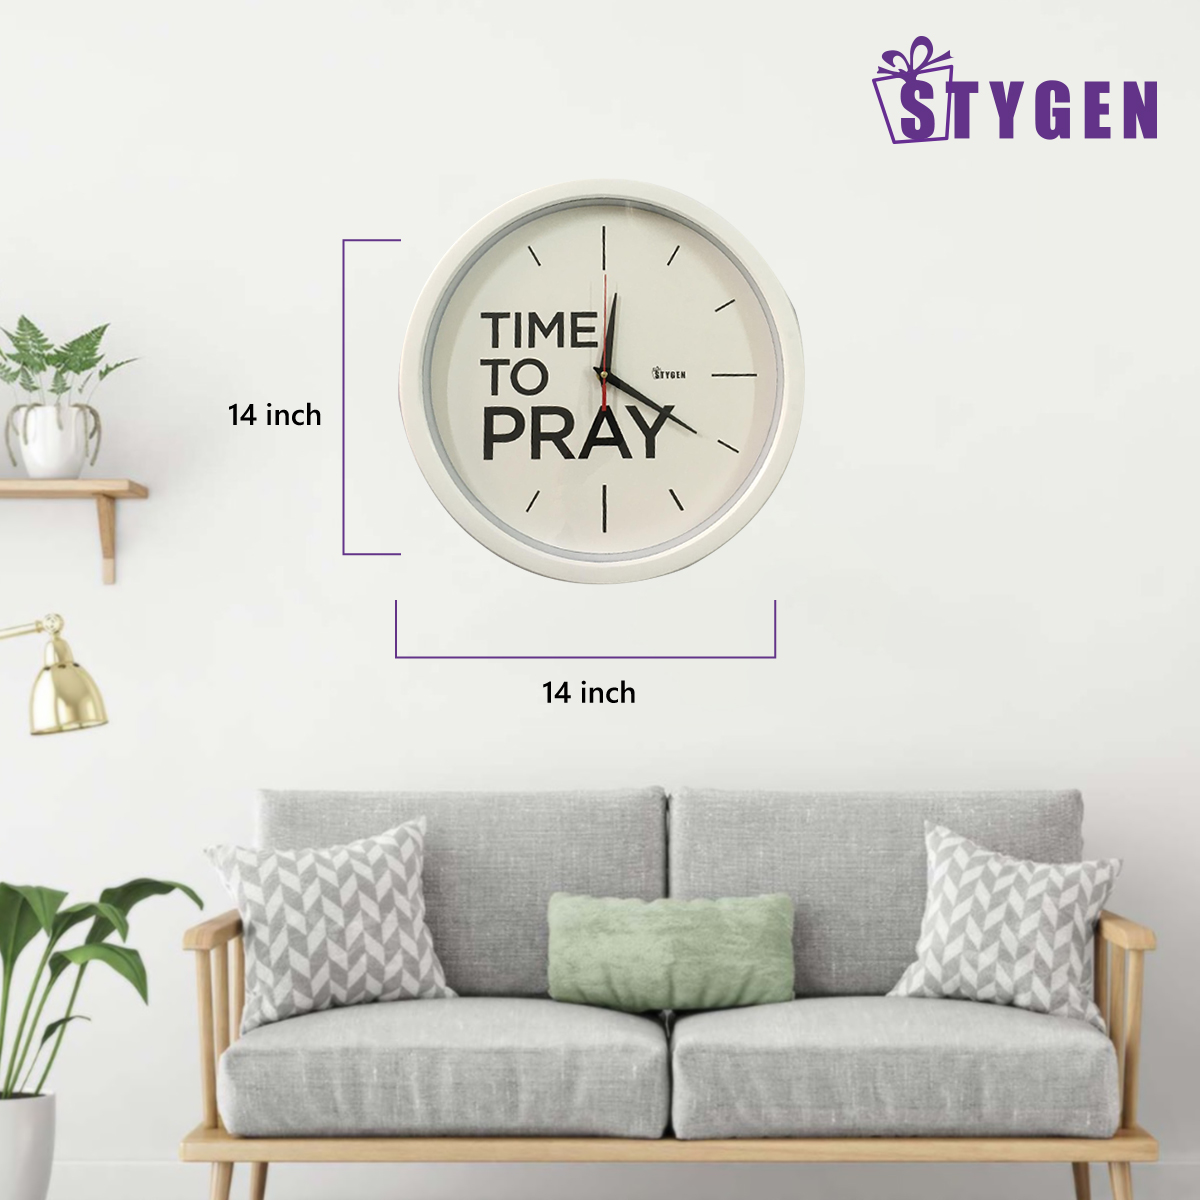 Decorative Wall Clock - Time to Pray